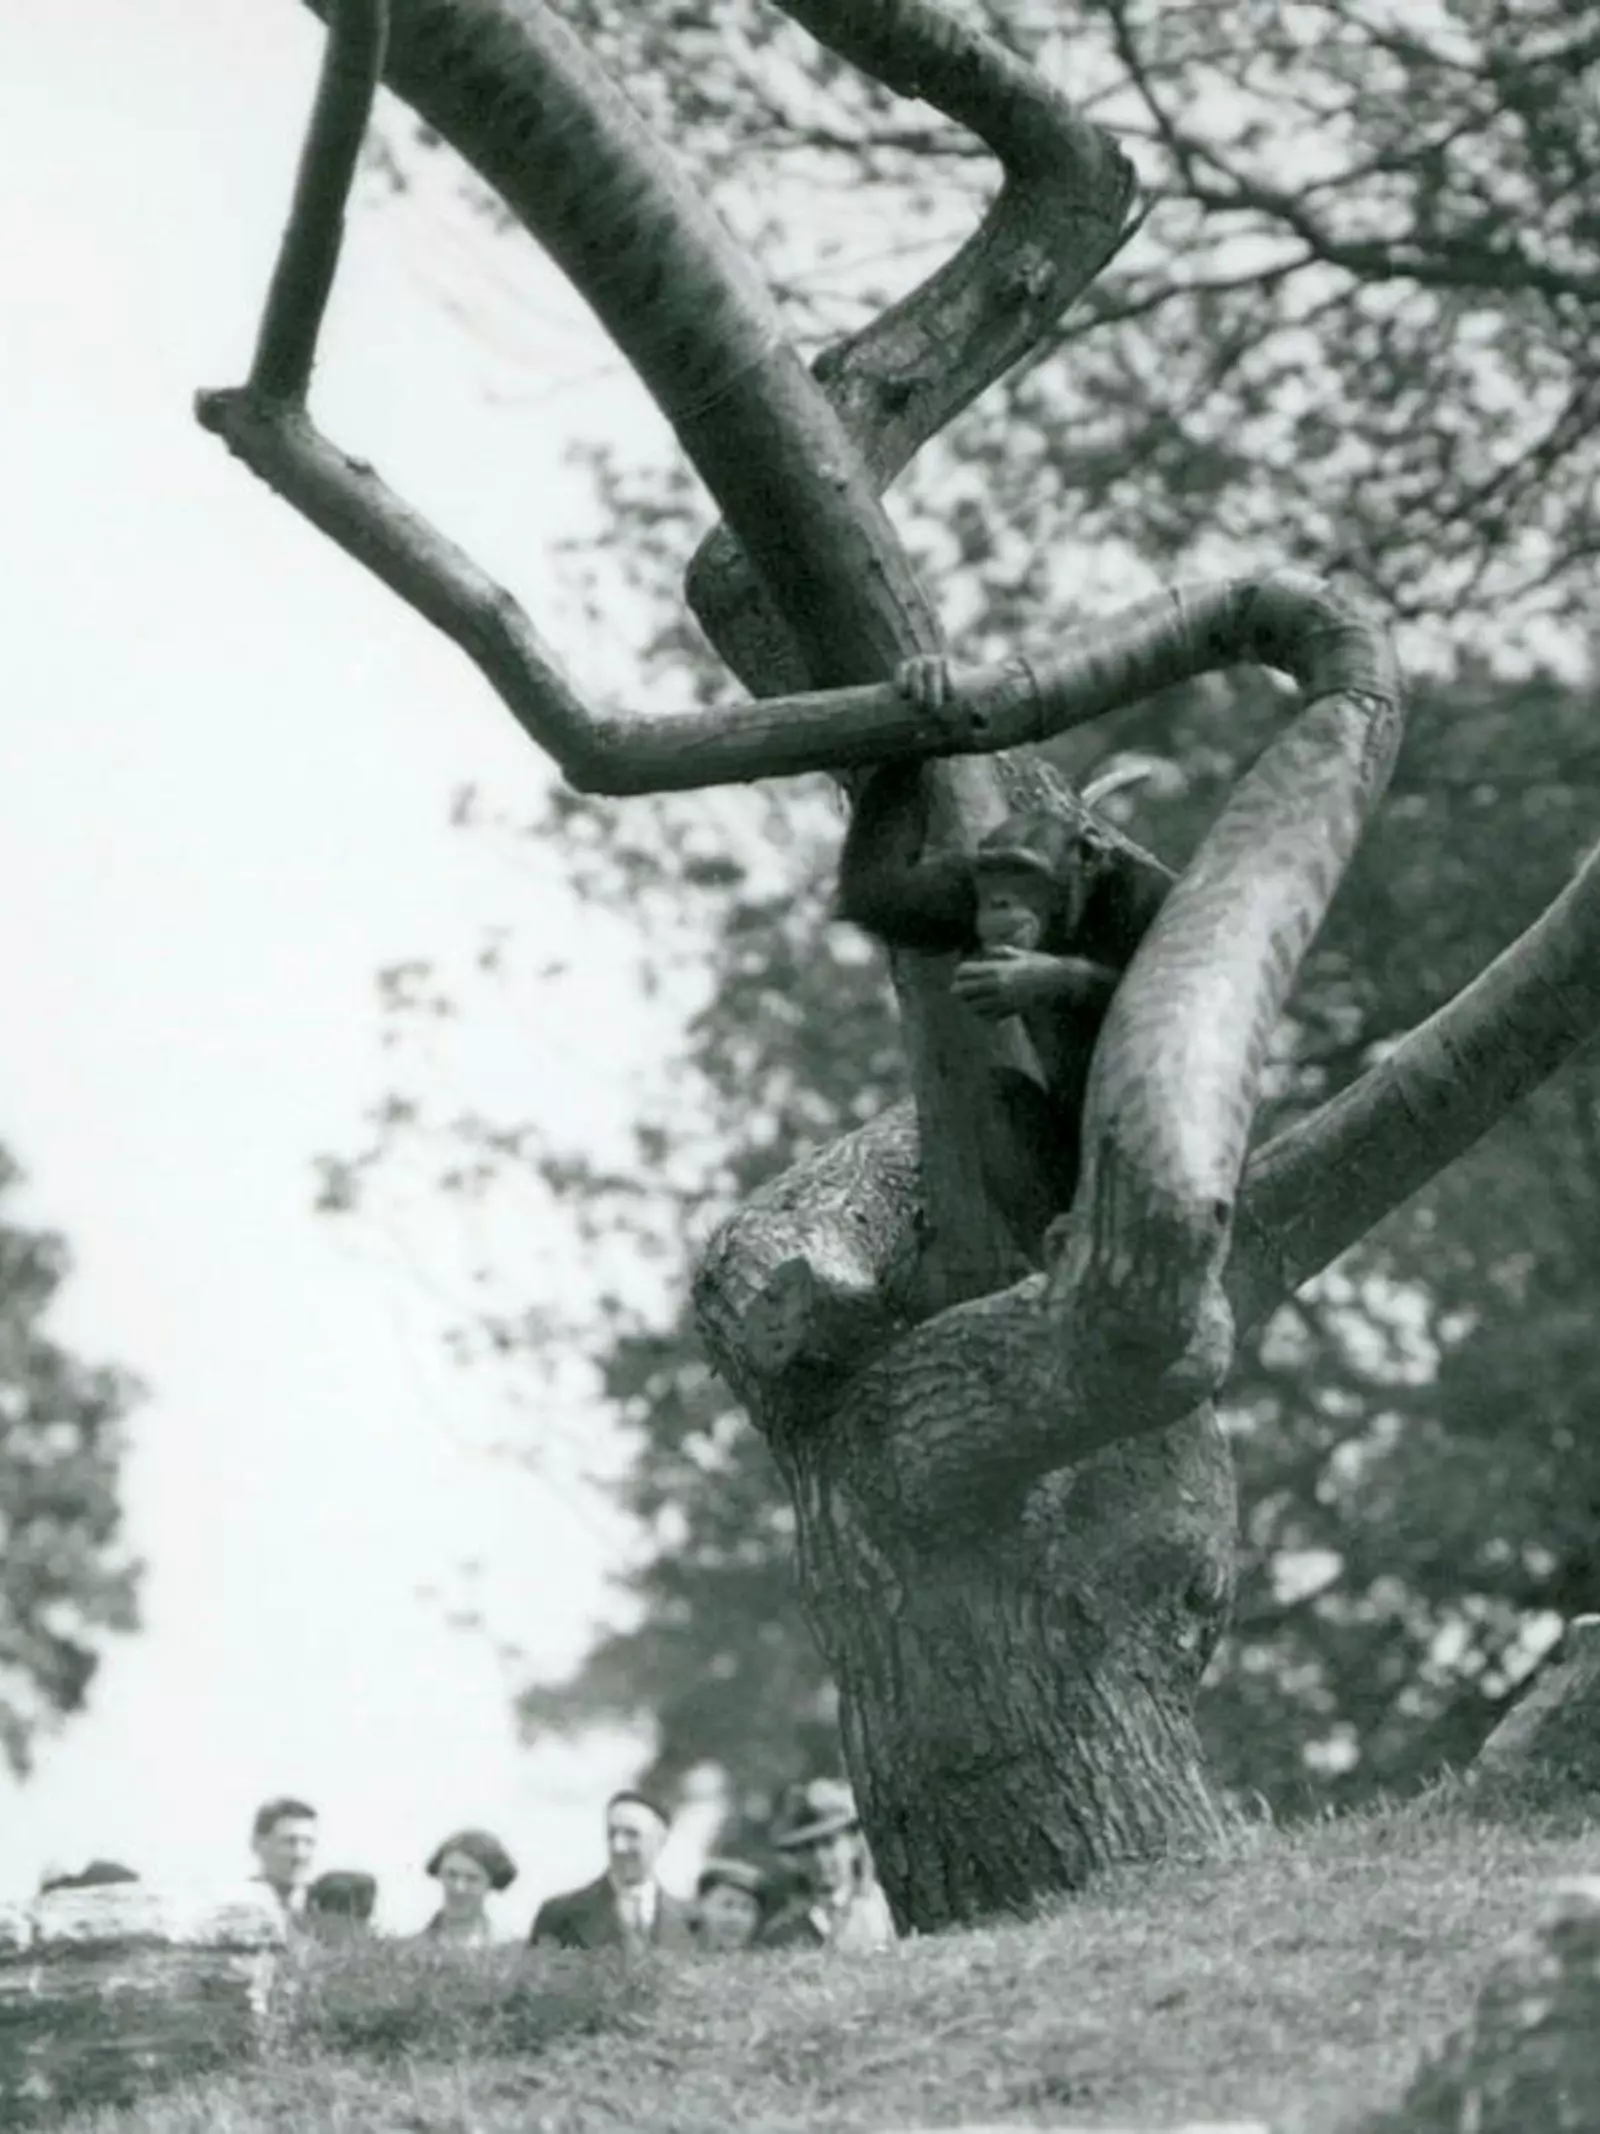 A Chimpanzee sitting in a tree branch, on a grassy knoll with rocks, at Whipsnade in 1936. There is a small crowd of visitors watching from beyond the barrier.